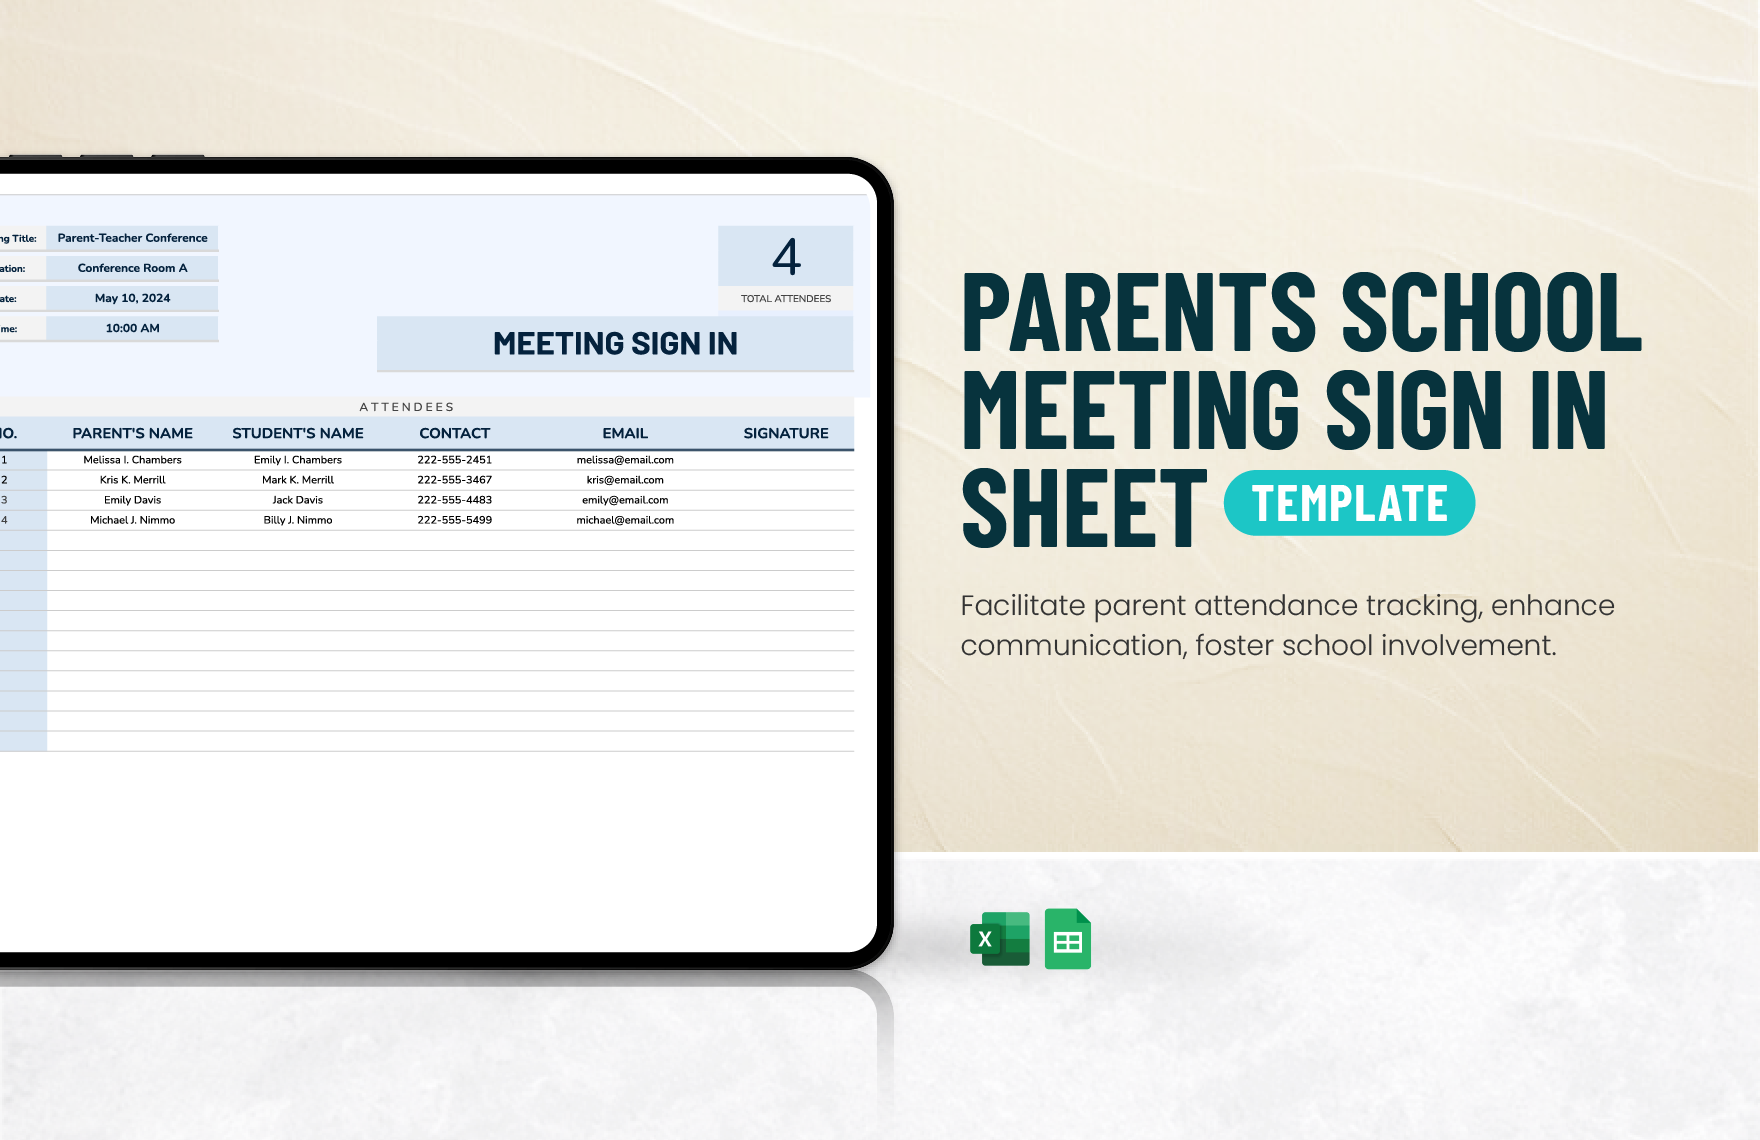 Parents School Meeting Sign in Sheet Template in Excel, Google Sheets